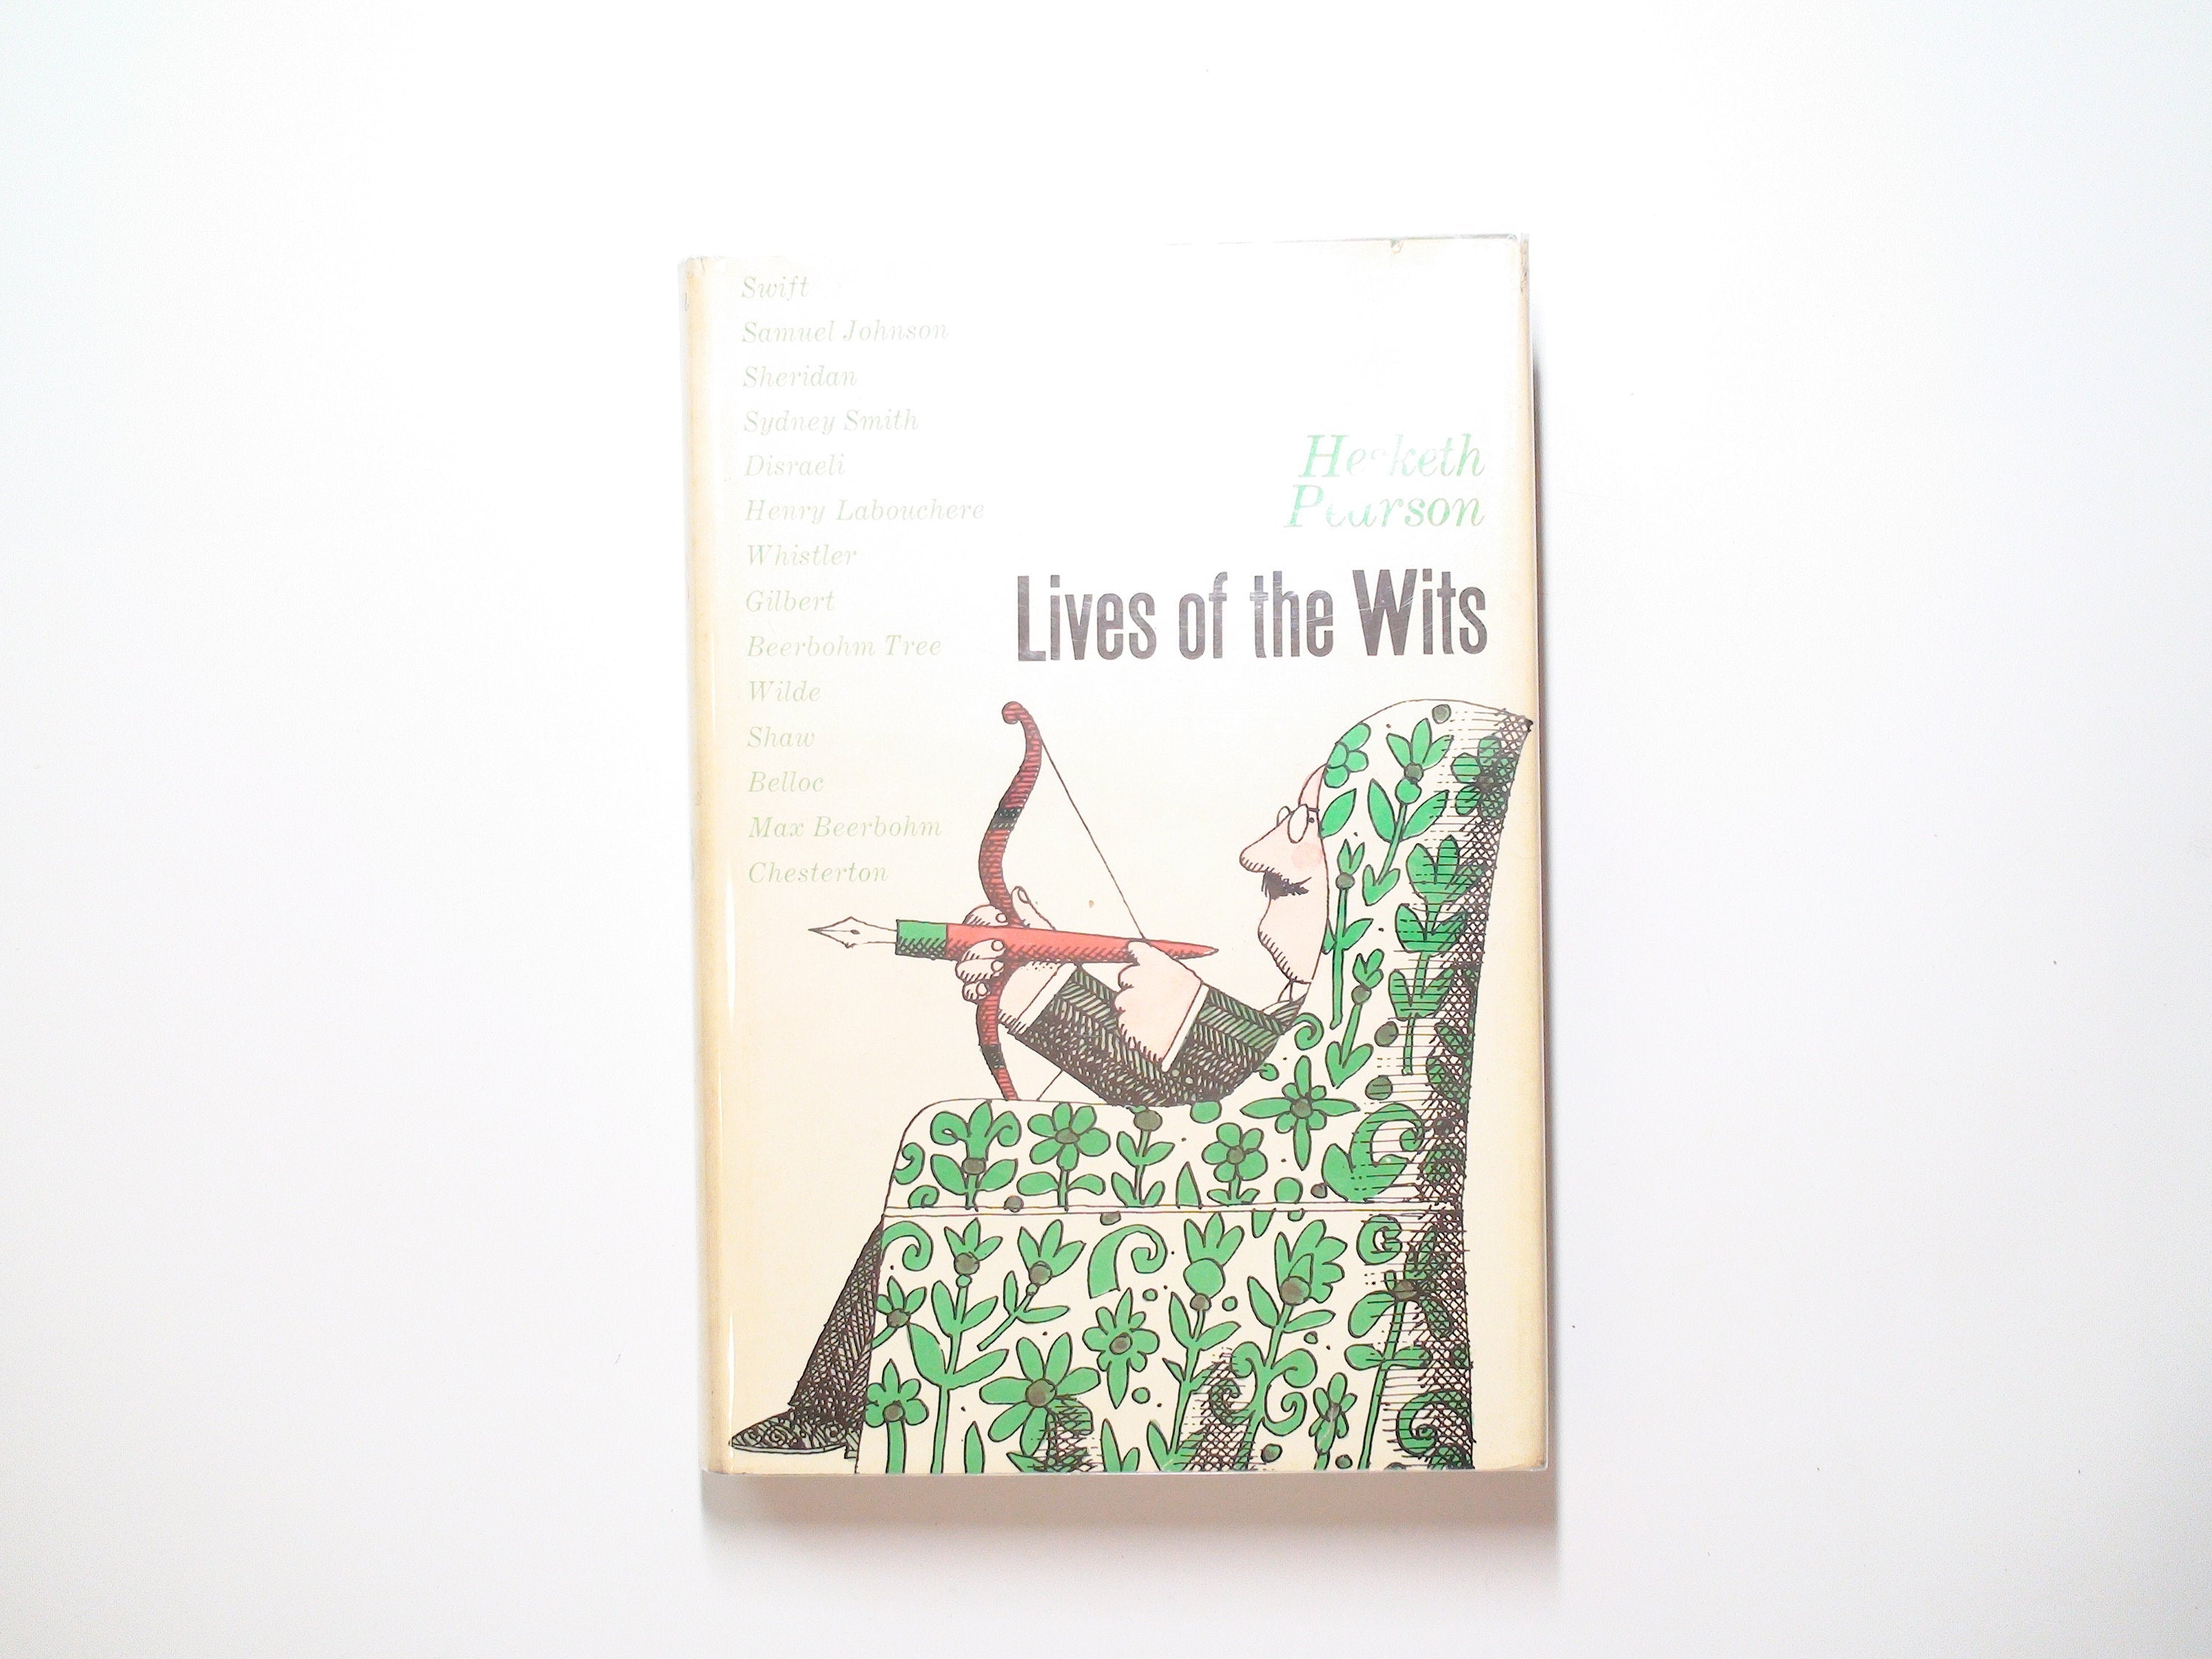 Lives of the Wits, Hesketh Pearson, Hardcover w D/J, 1st Ed, Illustrated, 1962